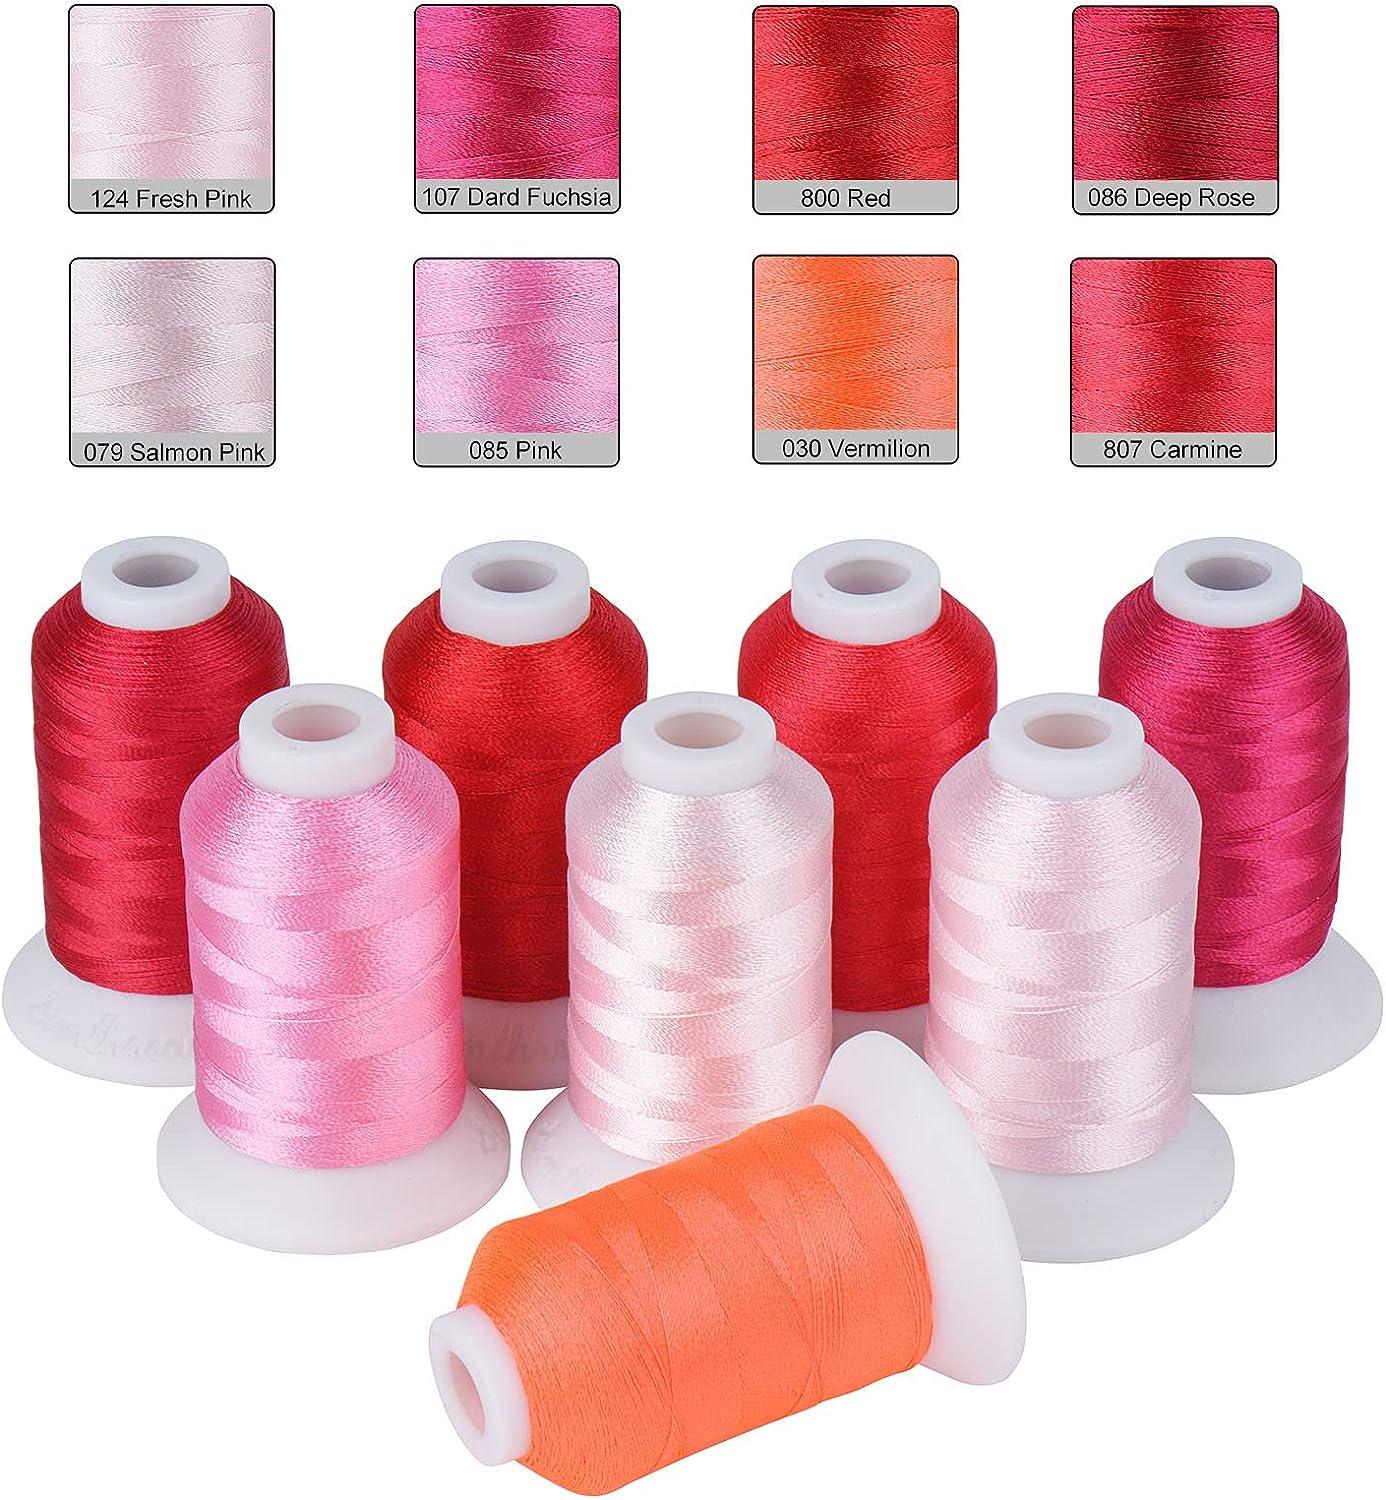 Simthread Embroidery Thread 5500 Yards Red 800, 40wt 100% Polyester for  Brother, Babylock, Janome, Singer, Pfaff, Husqvarna, Bernina Machine